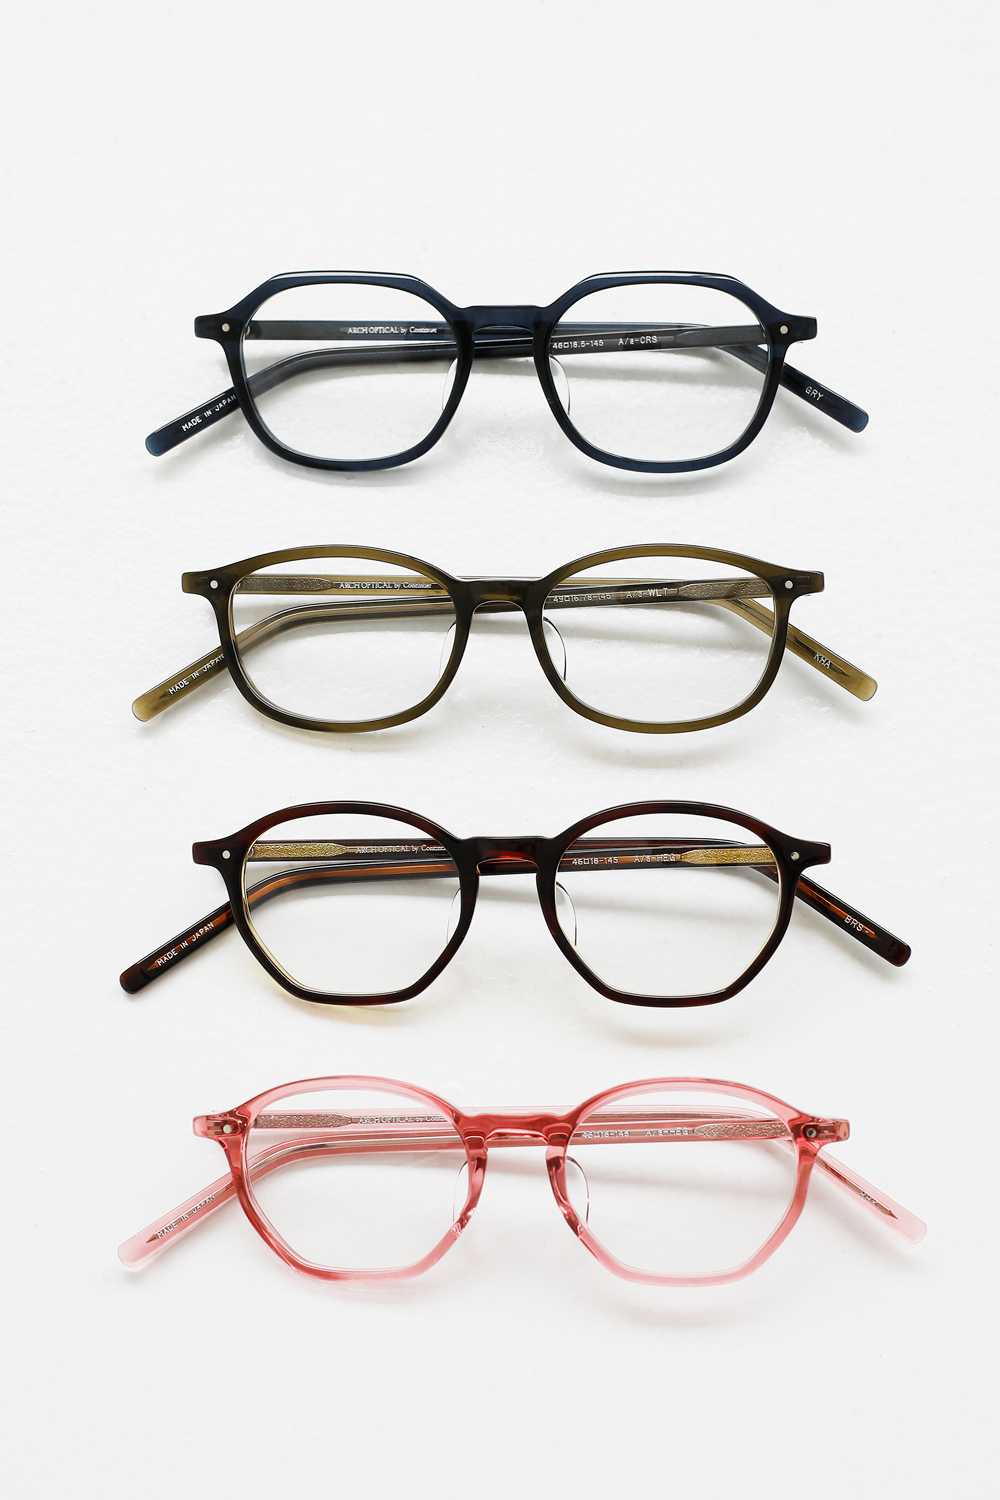 ARCH OPTICAL｜NEW COLLECTION｜TOPIC｜Continuer Inc.｜メガネ 